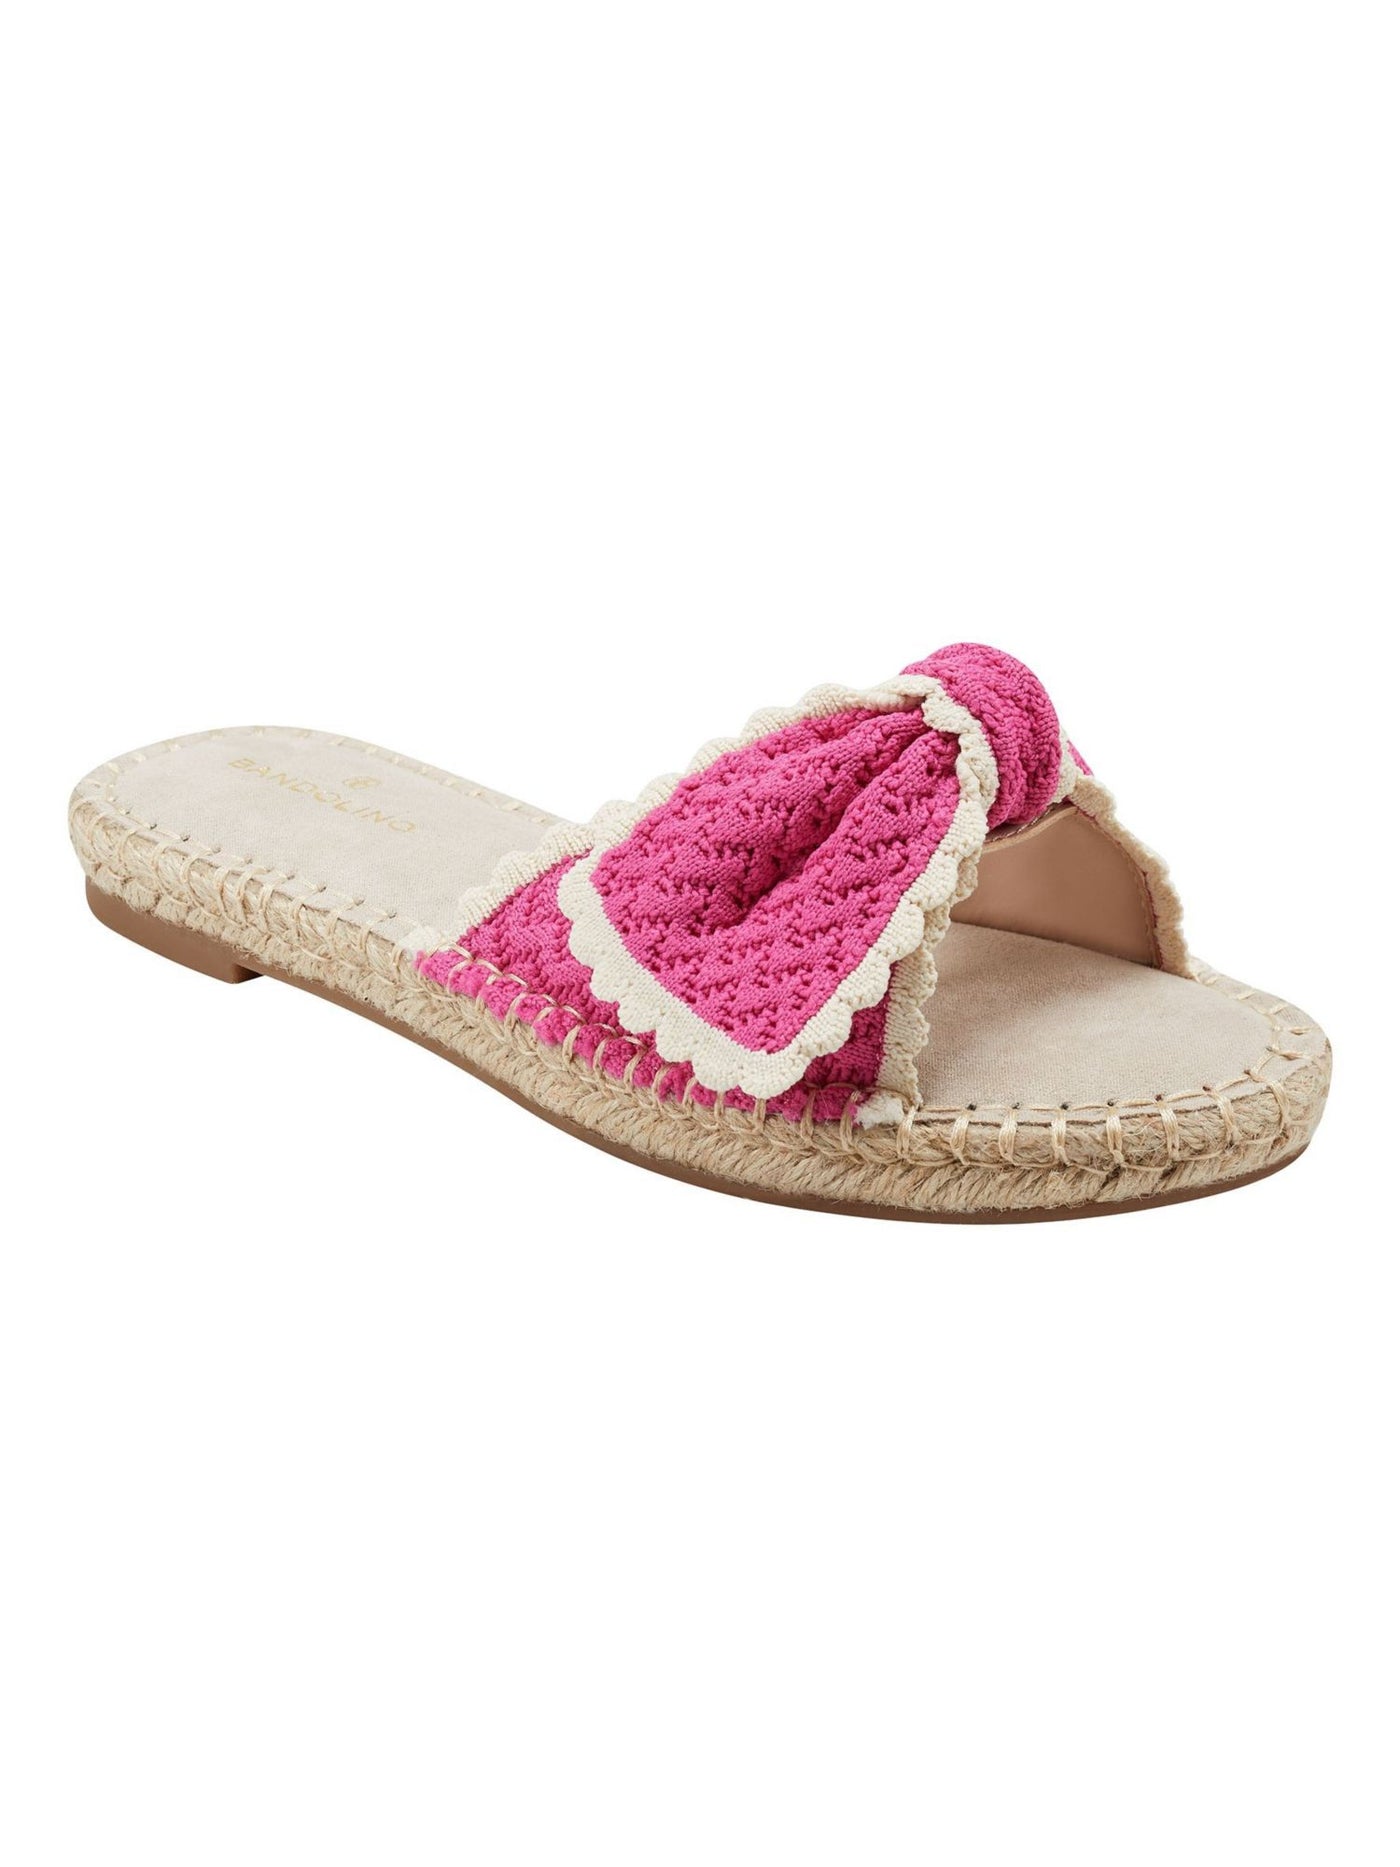 BANDOLINO Womens Pink Knit Bow Accent Padded Braylin Round Toe Slip On Espadrille Shoes 9 M